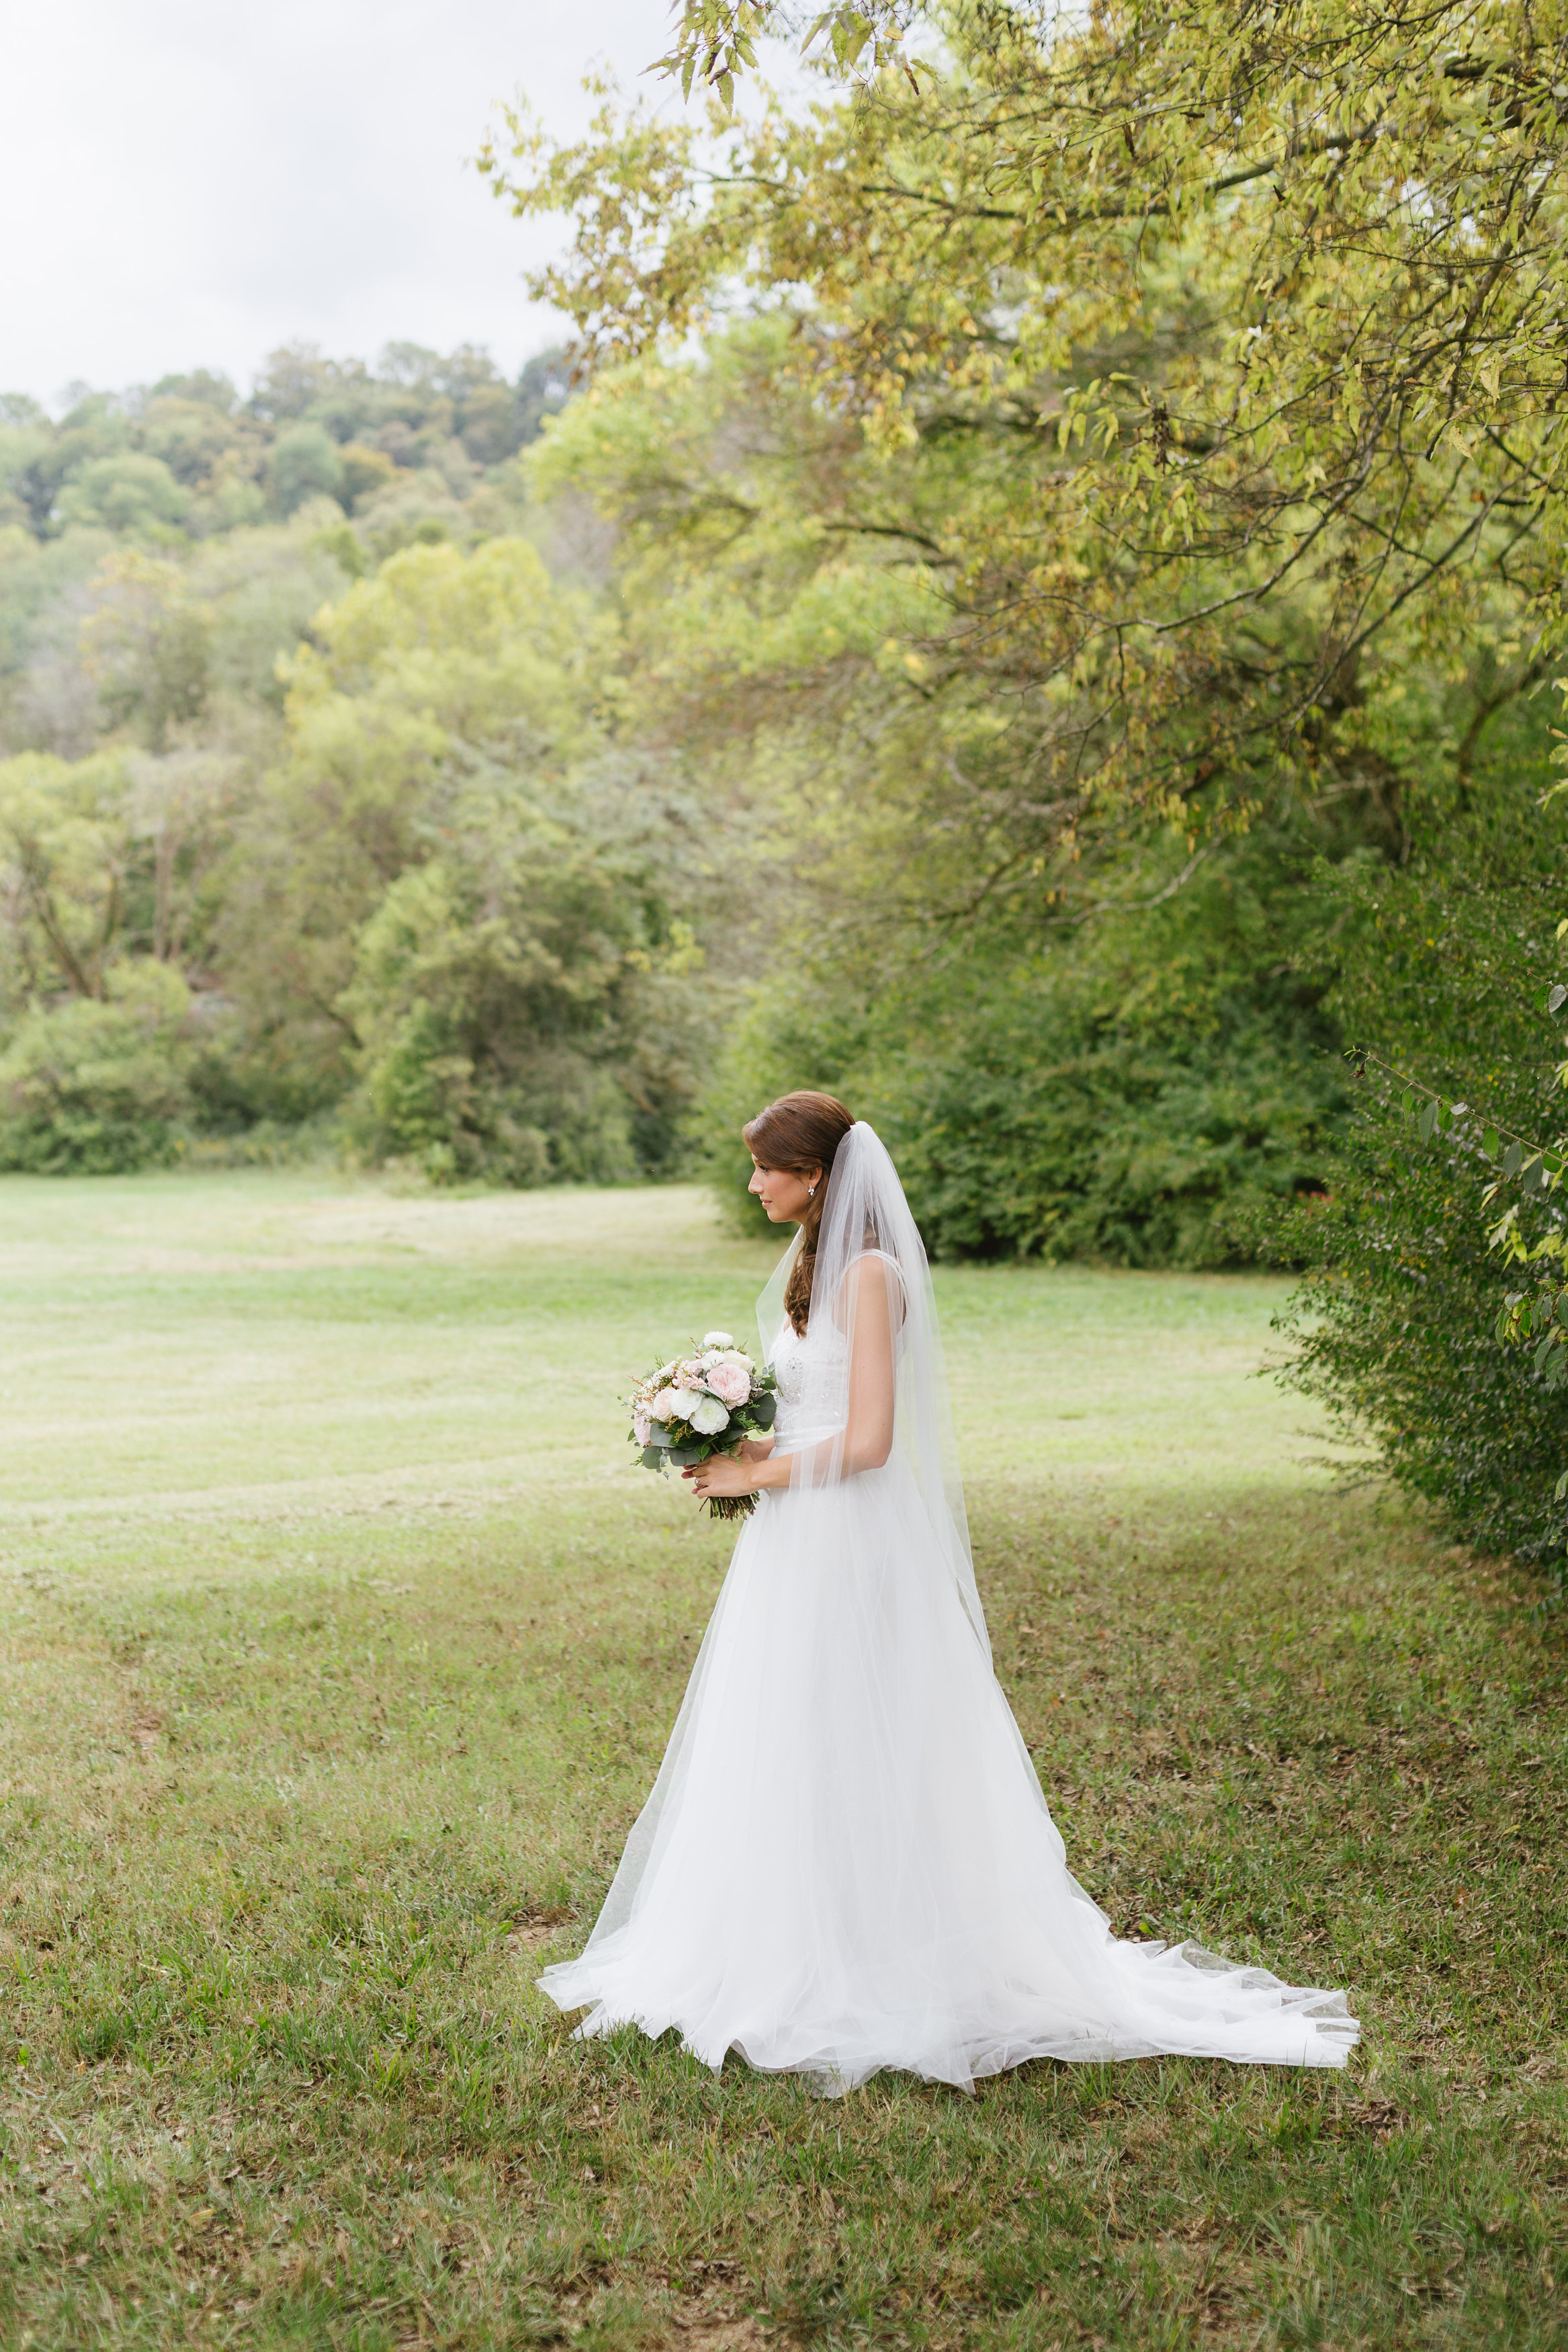 October wedding in the Tennessee Countryside // Organic Floral Design